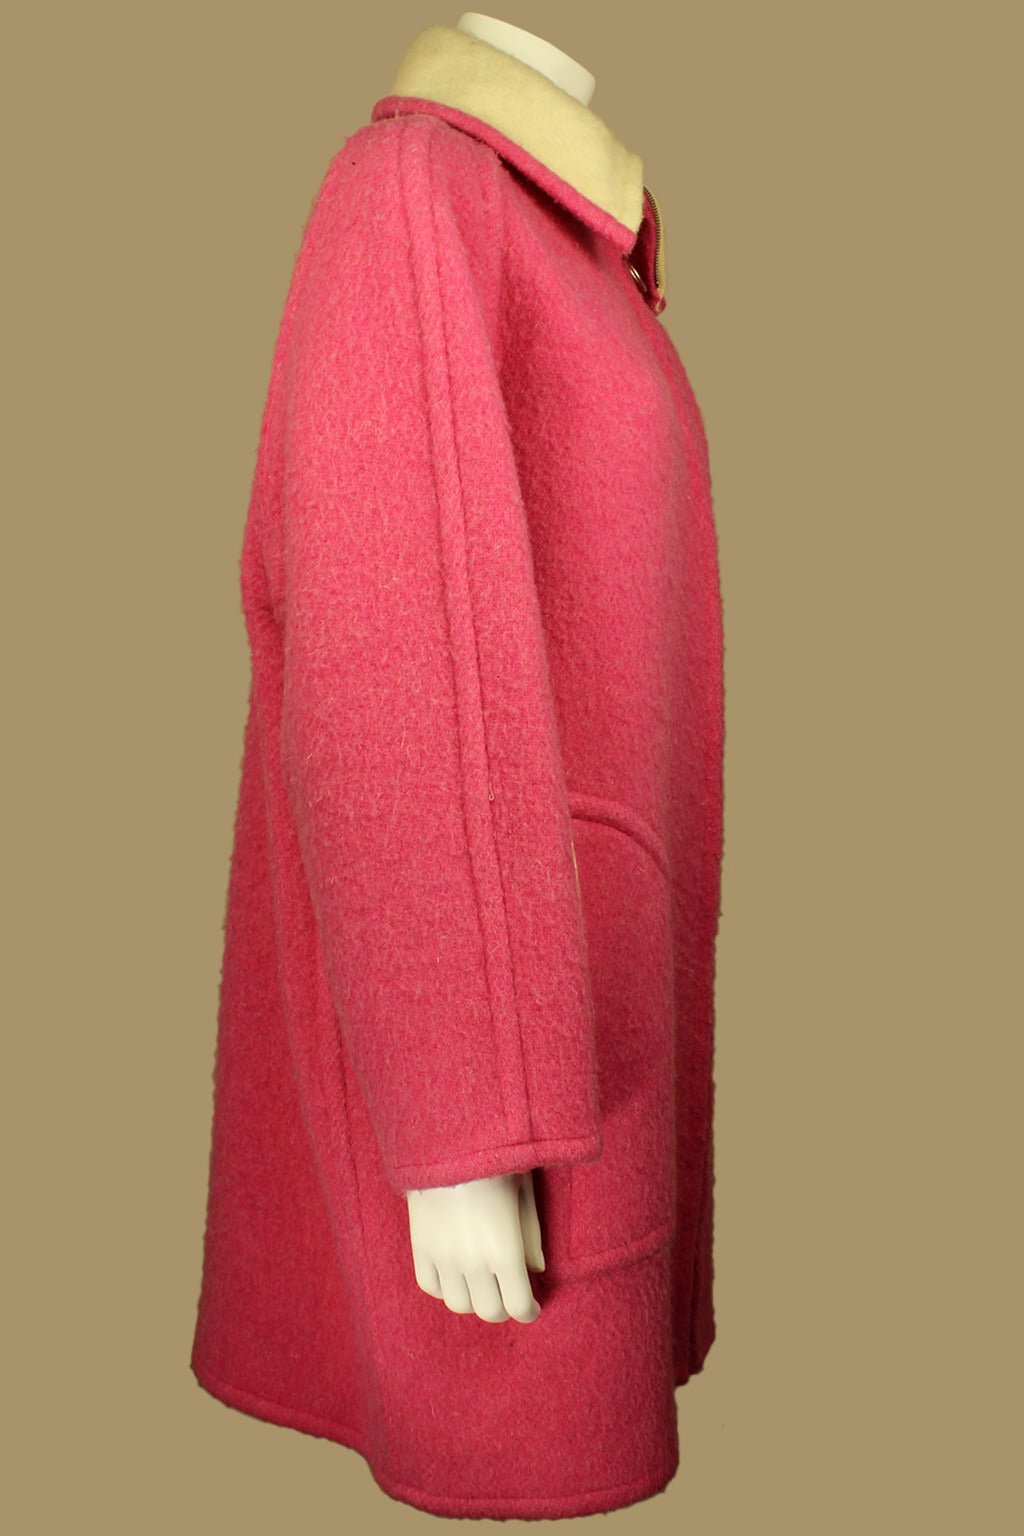 SALE! Originally $825
This is a fantastic Courreges piece. This cosy wool coat is in a vibrant rosy pink with a creme lining. It has a zipper with a ring pull running from the neck to the hem. It can be zipped all the way up creating a funnel-like